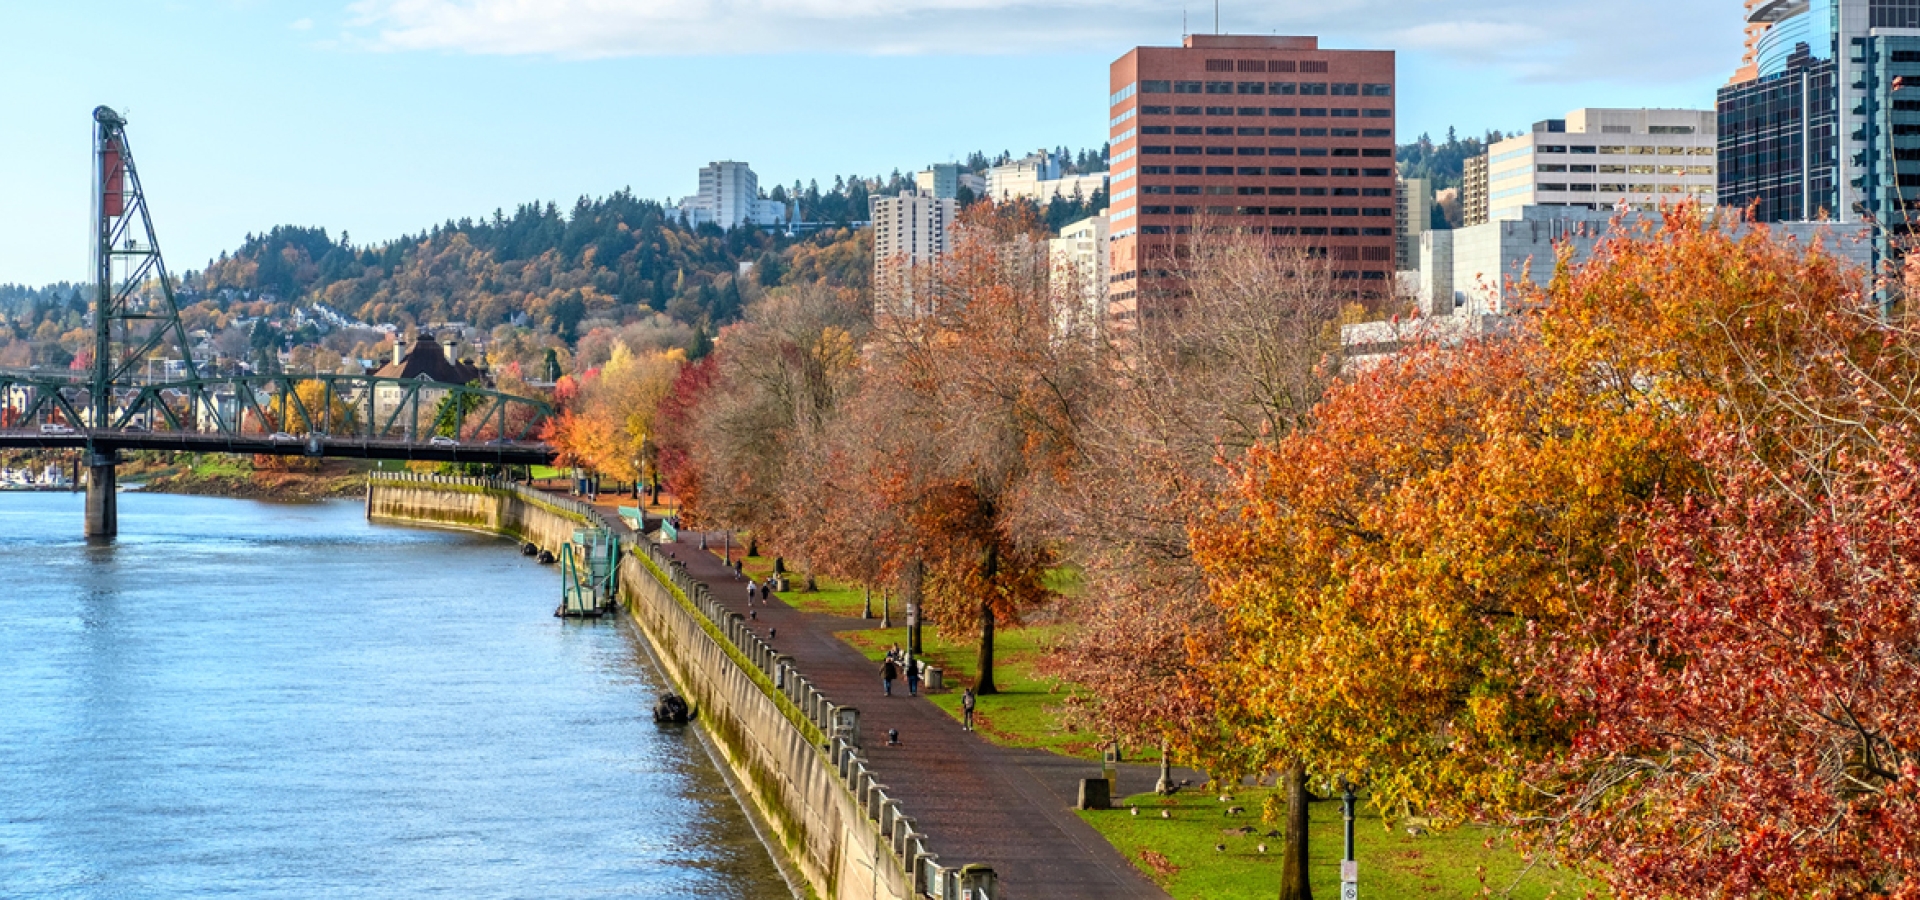 https://www.amtrakvacations.com/sites/amtrak/files/styles/hero/public/images/Portland-in-autumn.jpg?h=0f7a3278&itok=4Gz95uK7